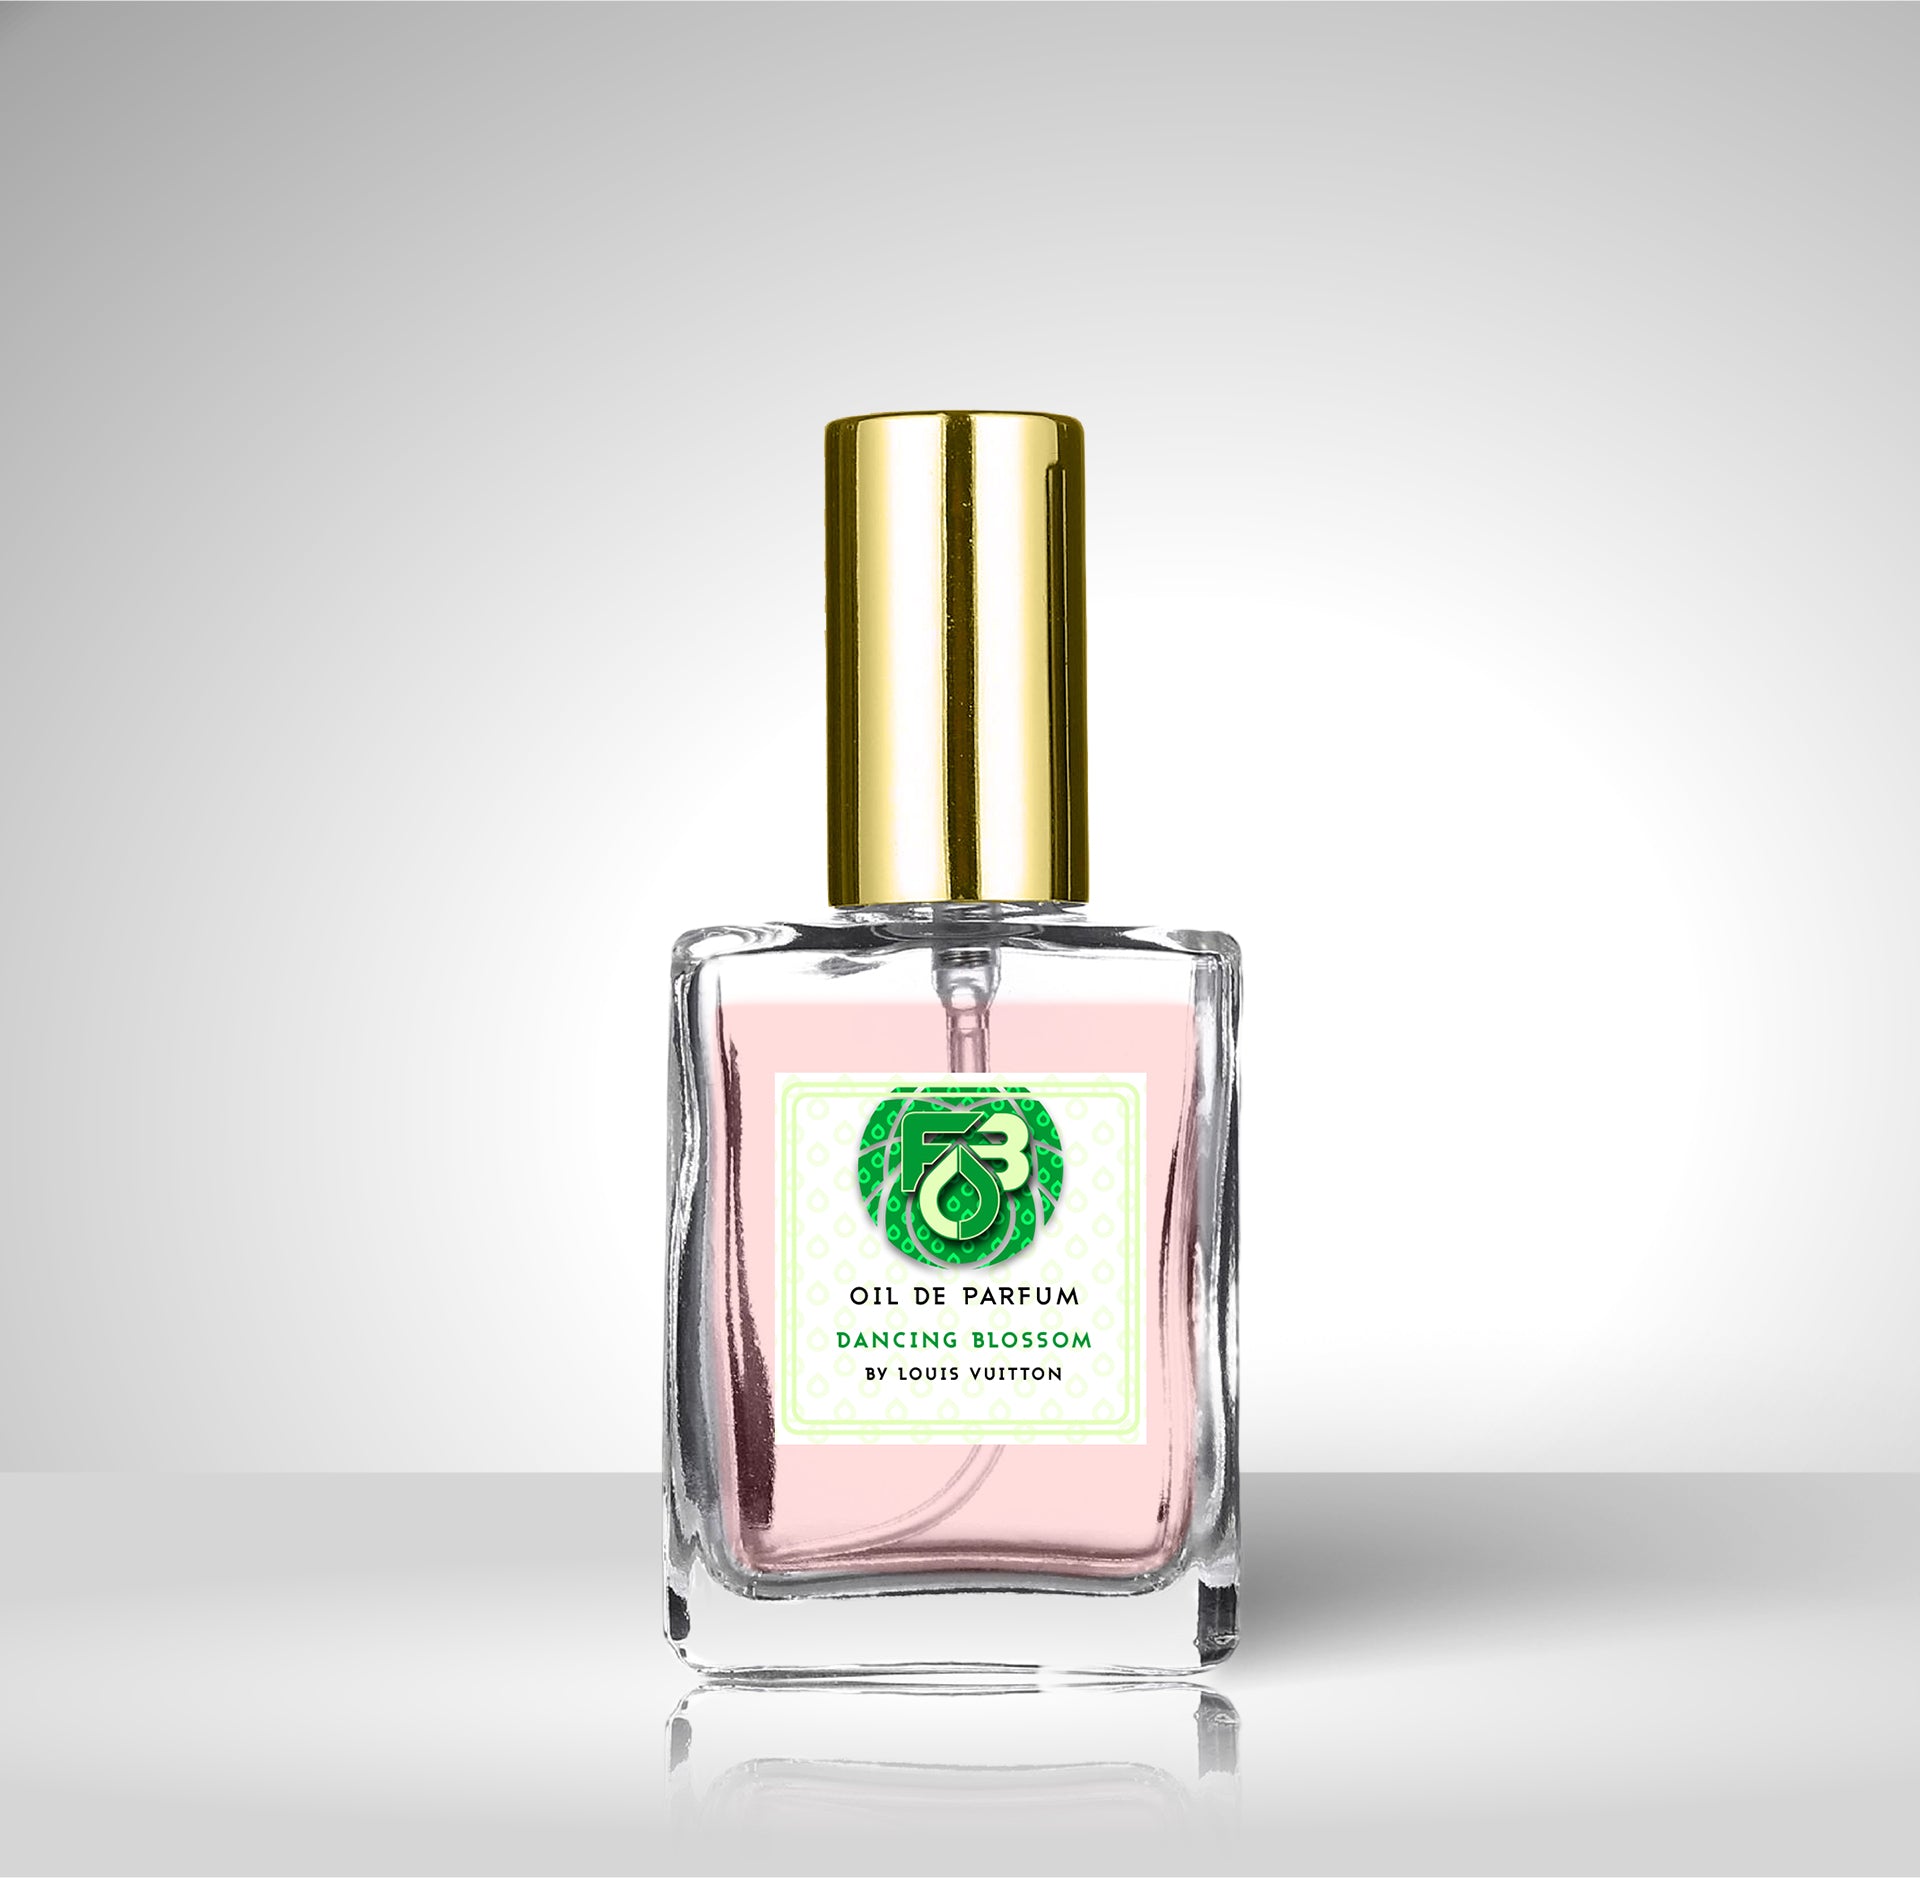 Compares to Dancing Blossom® By Louis Vuitton (U) - The ESscents